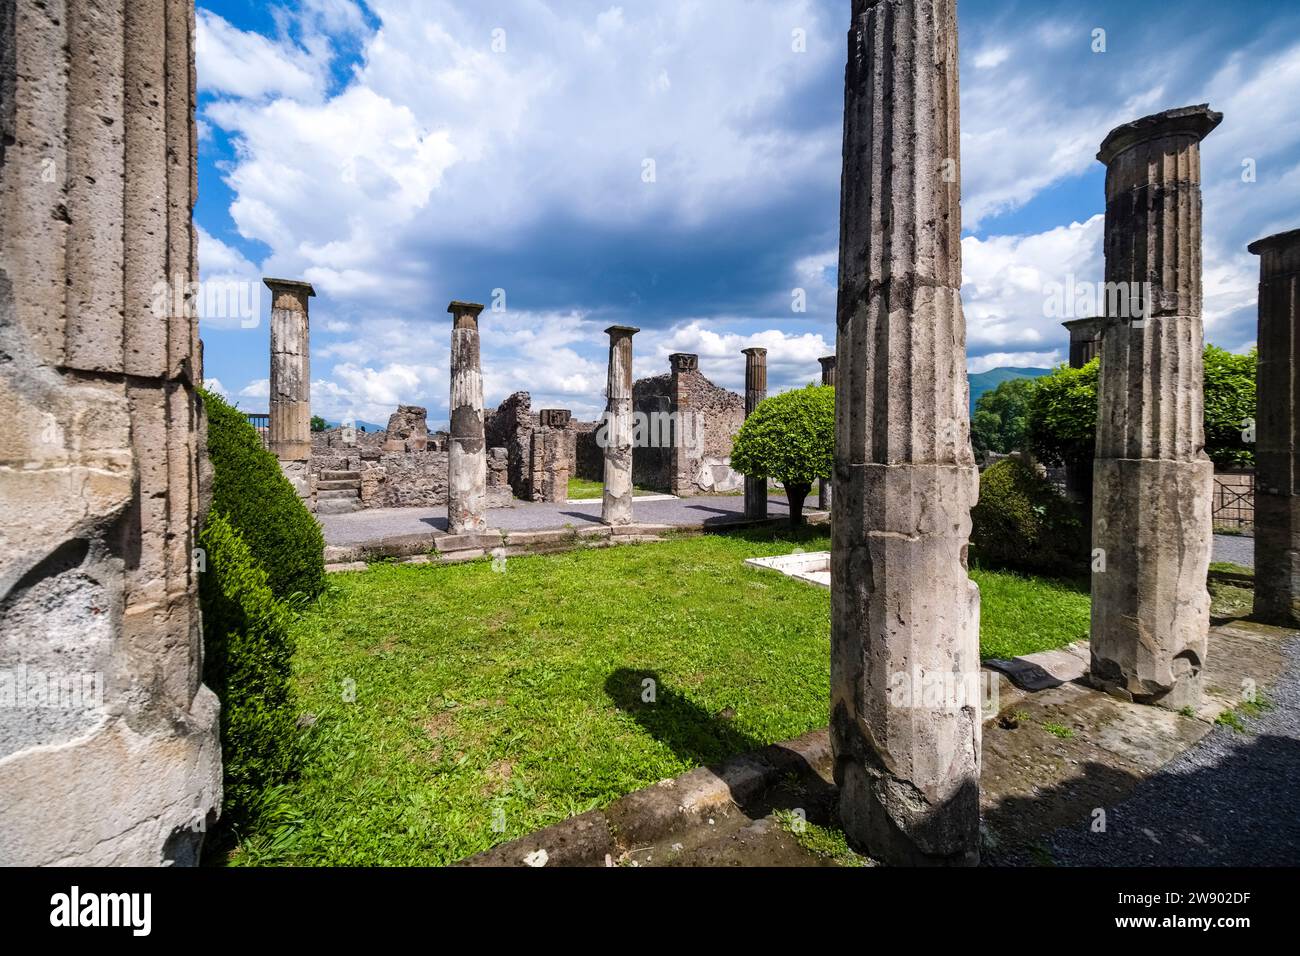 Ruins of the Casa dei Cornelii in the archaeological site of Pompeii, an ancient city destroyed by the eruption of Mount Vesuvius in 79 AD. Stock Photo